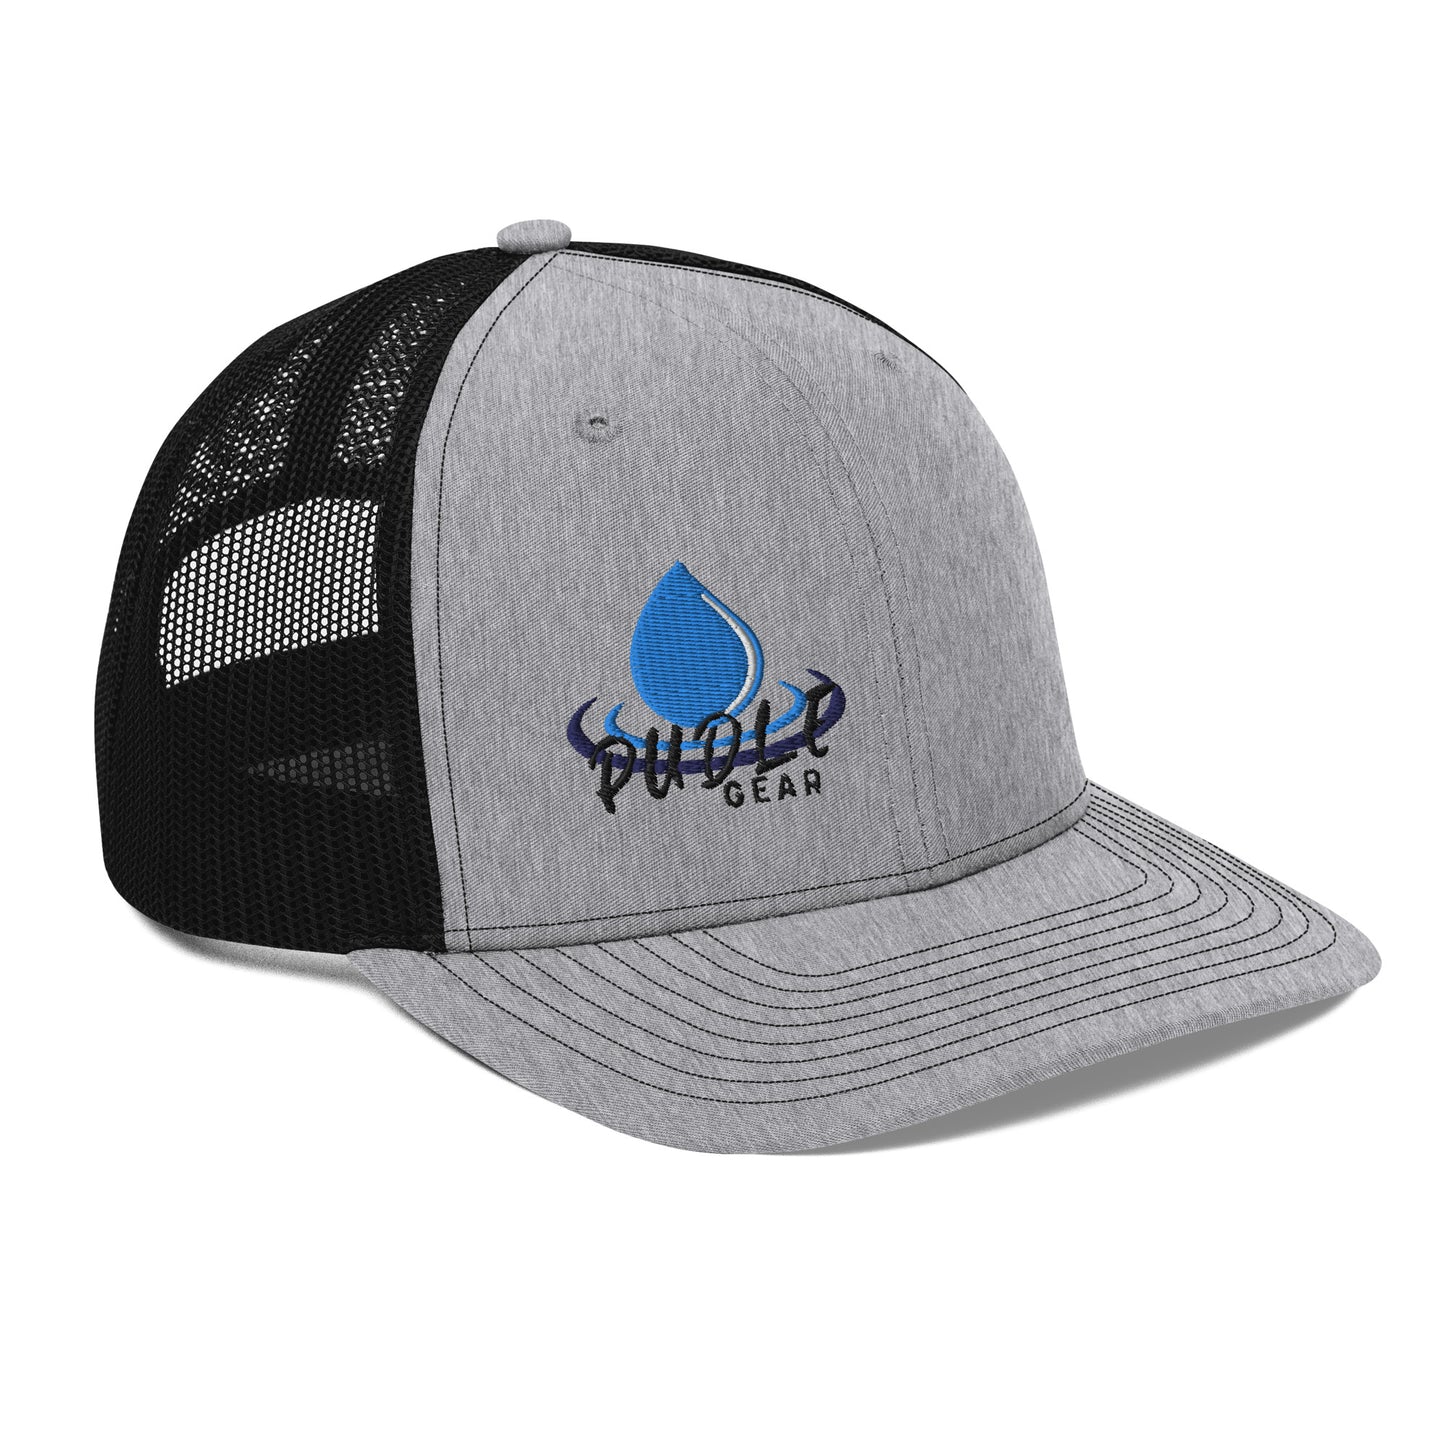 PUDLE Gear Embroidered Trucker Cap